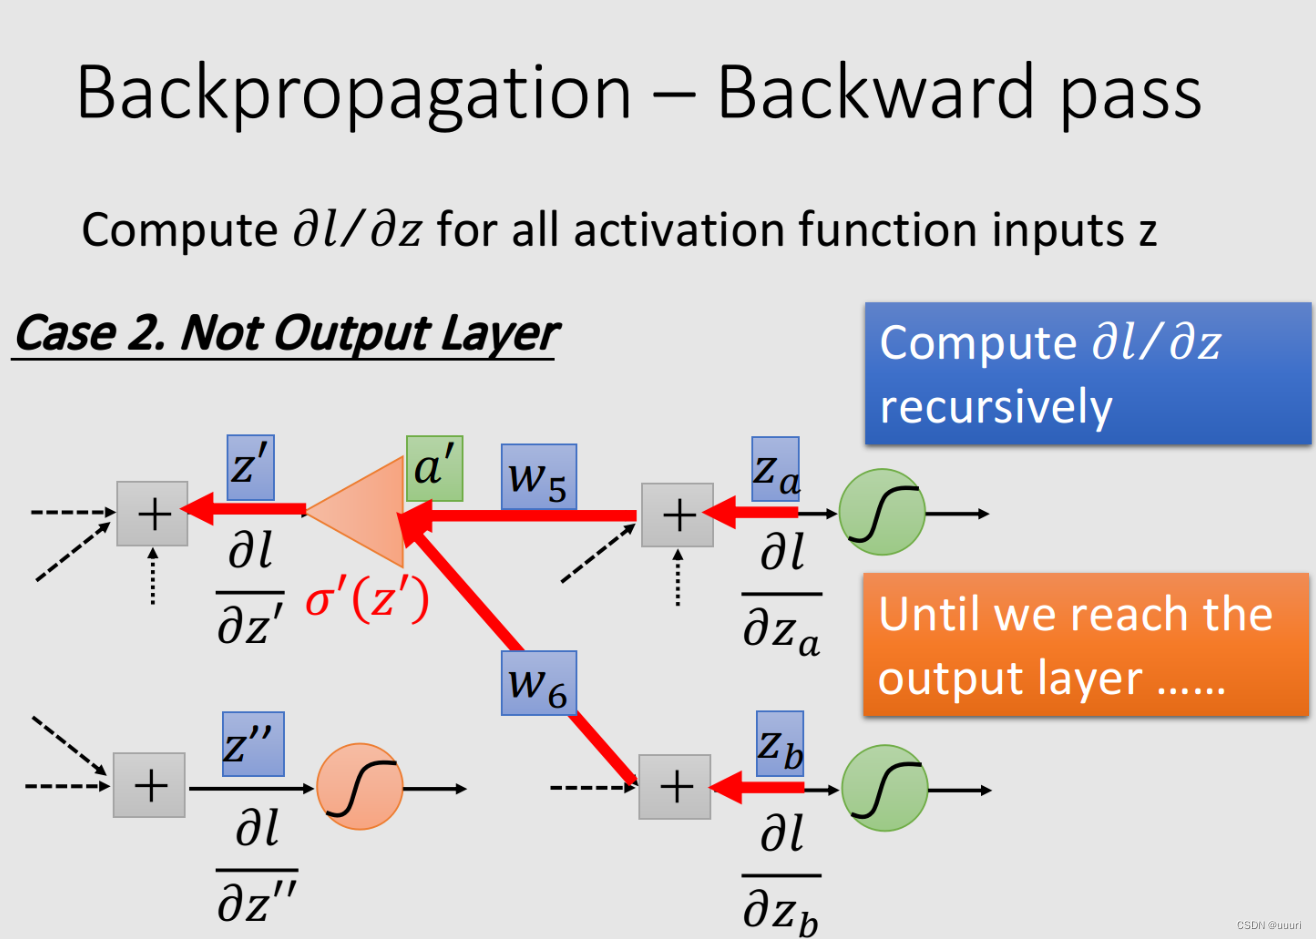 /bp-not-output-layer